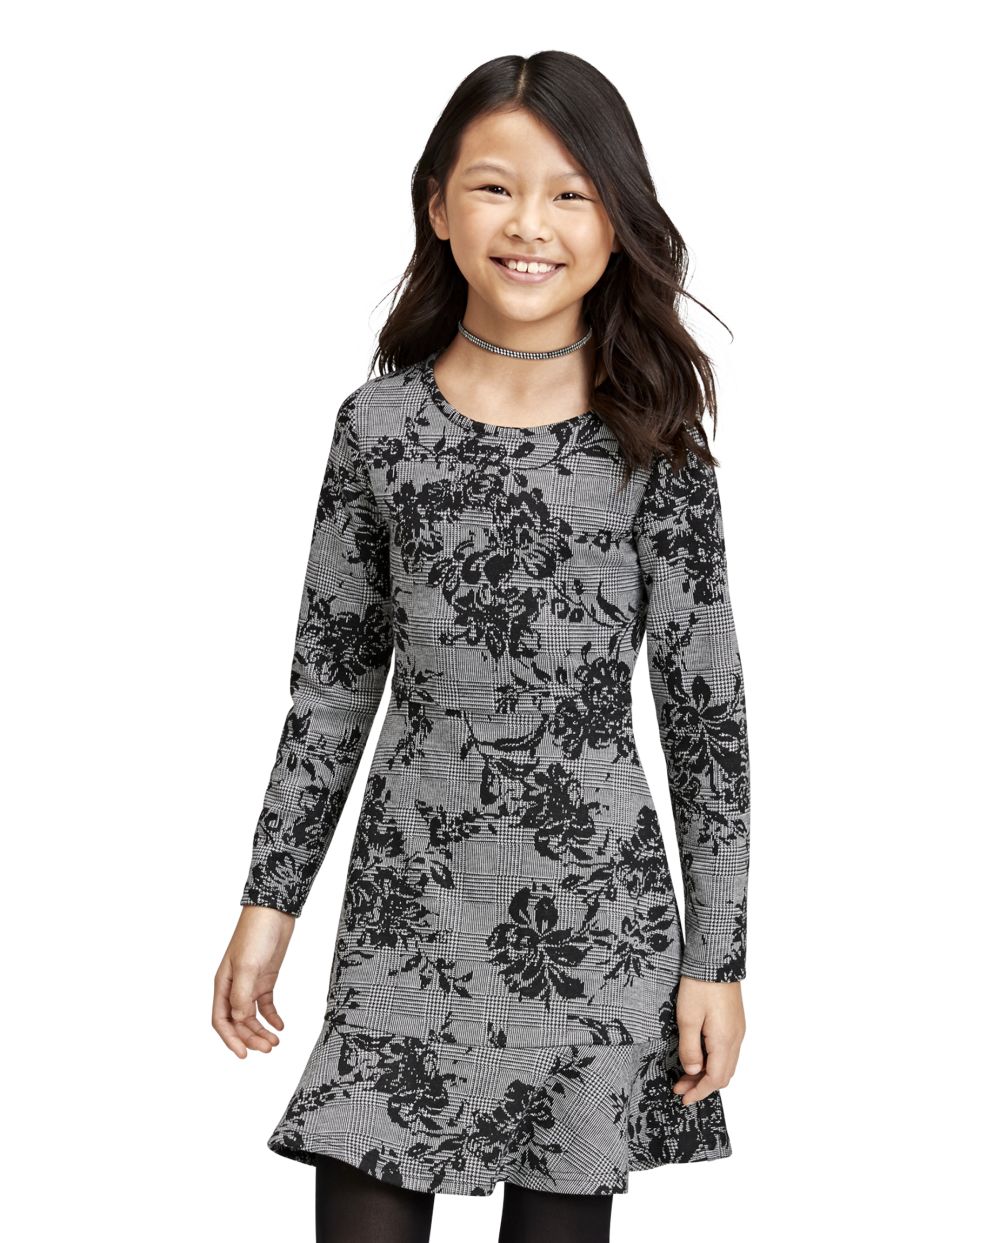 

Girls Floral Ruffle Dress - Black - The Children's Place